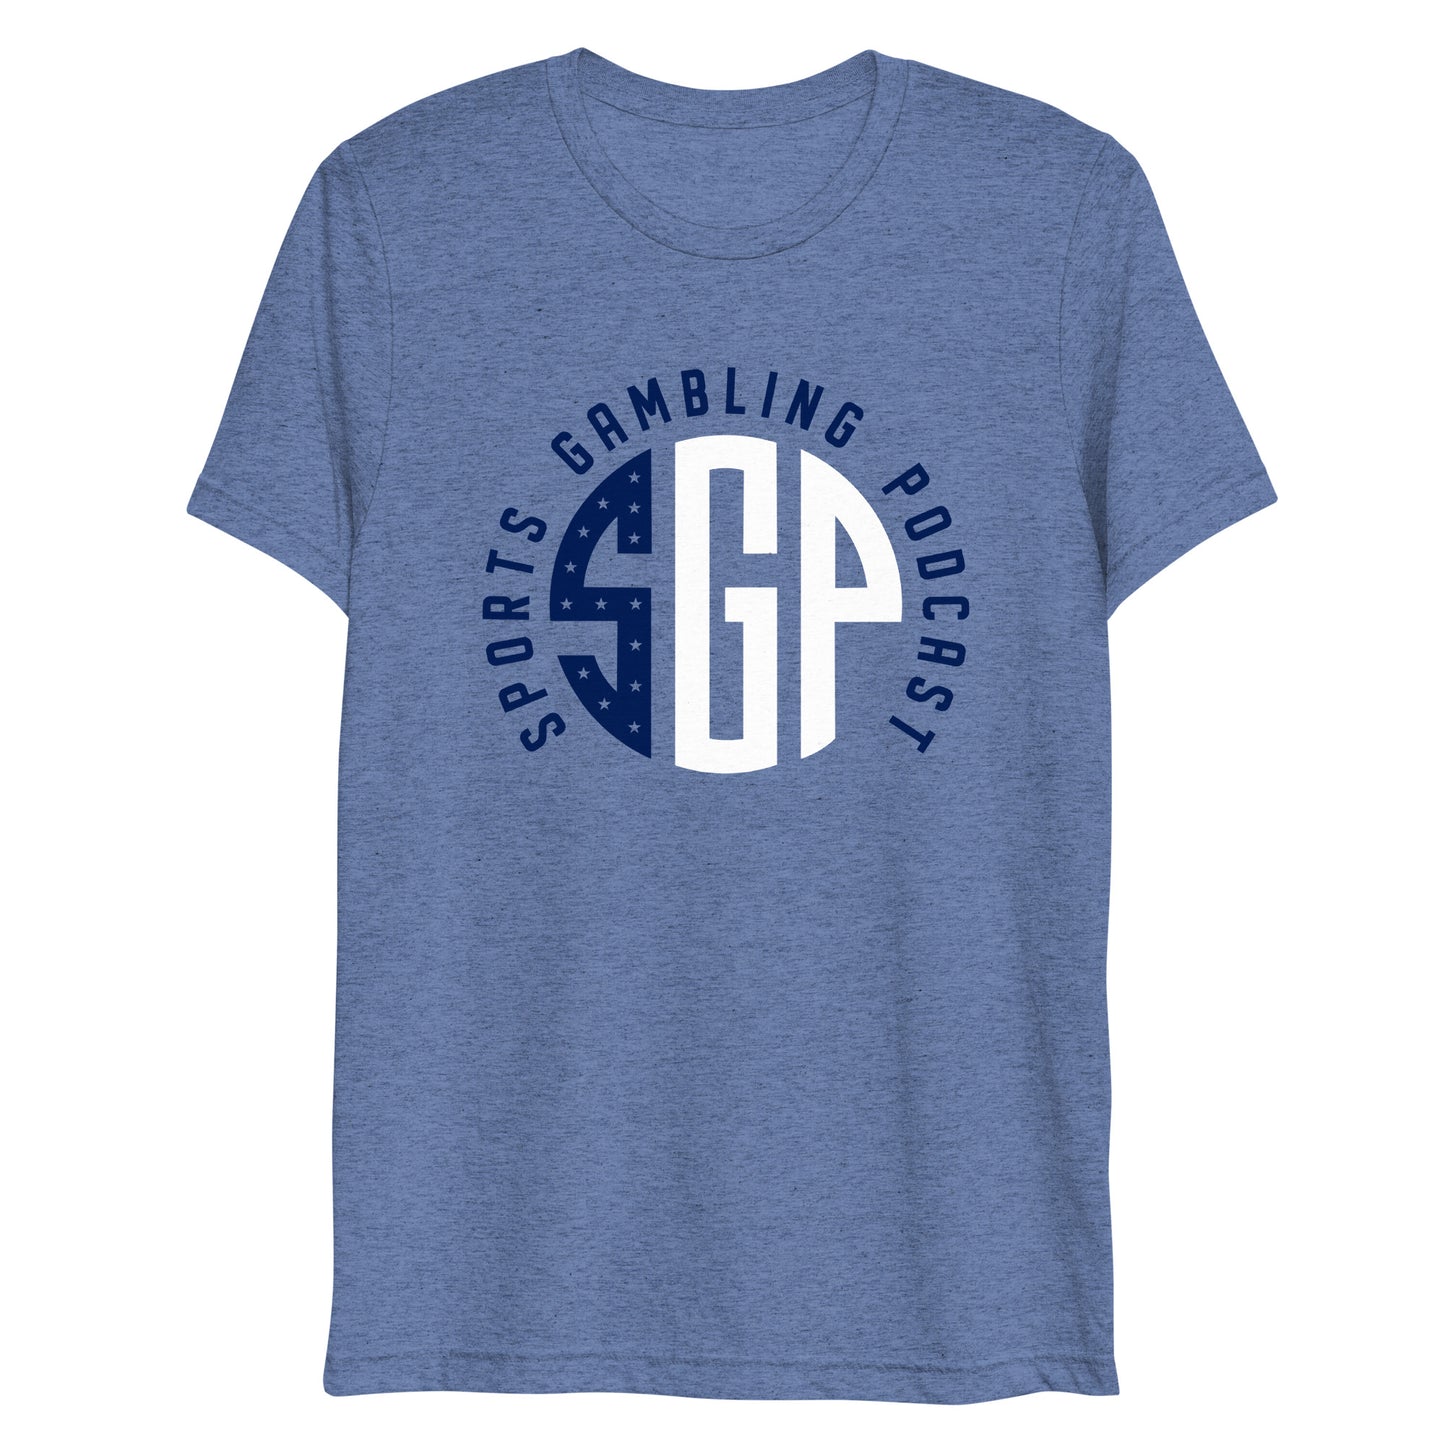 SGP Red, White and Blue Short sleeve t-shirt (Blue Shirts)